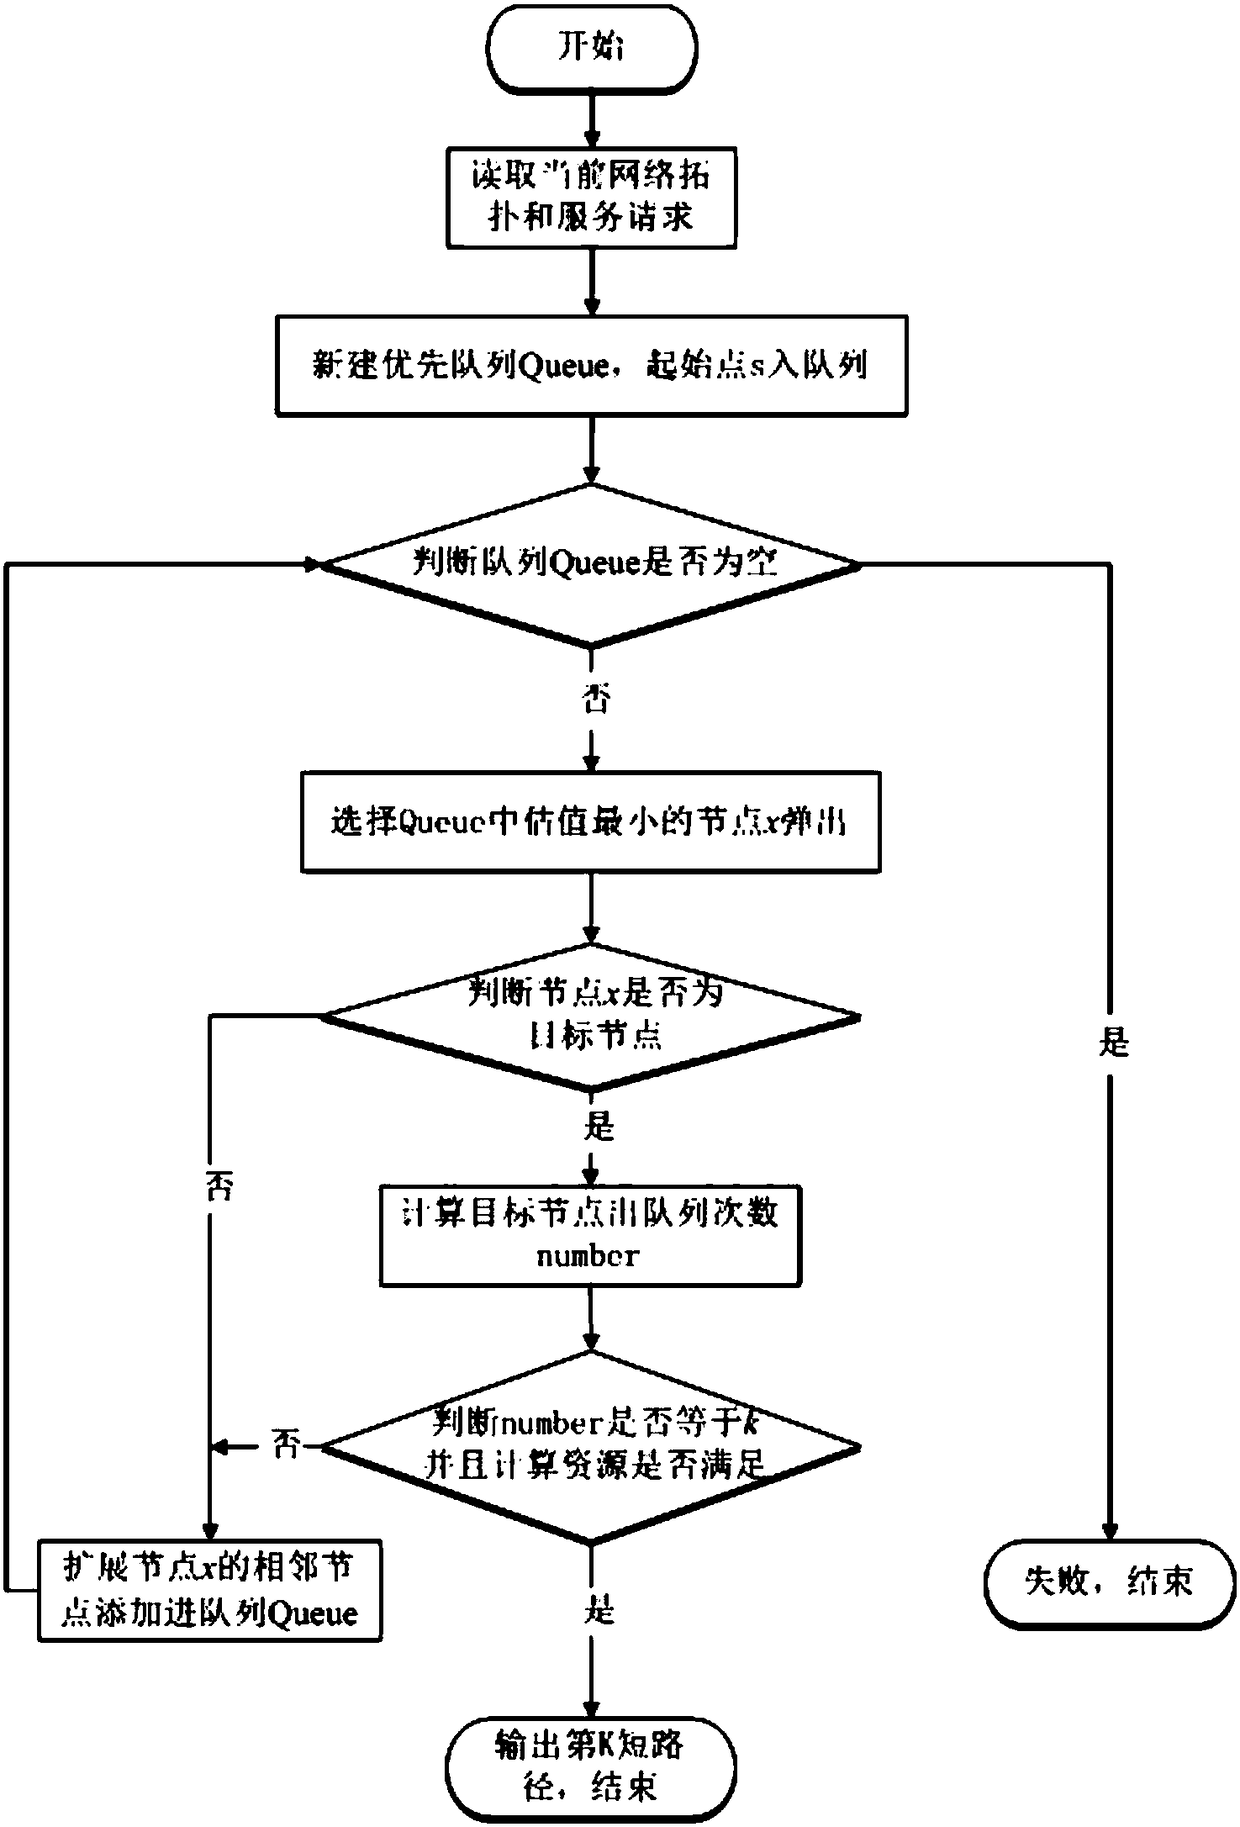 Network service function chain mapping method